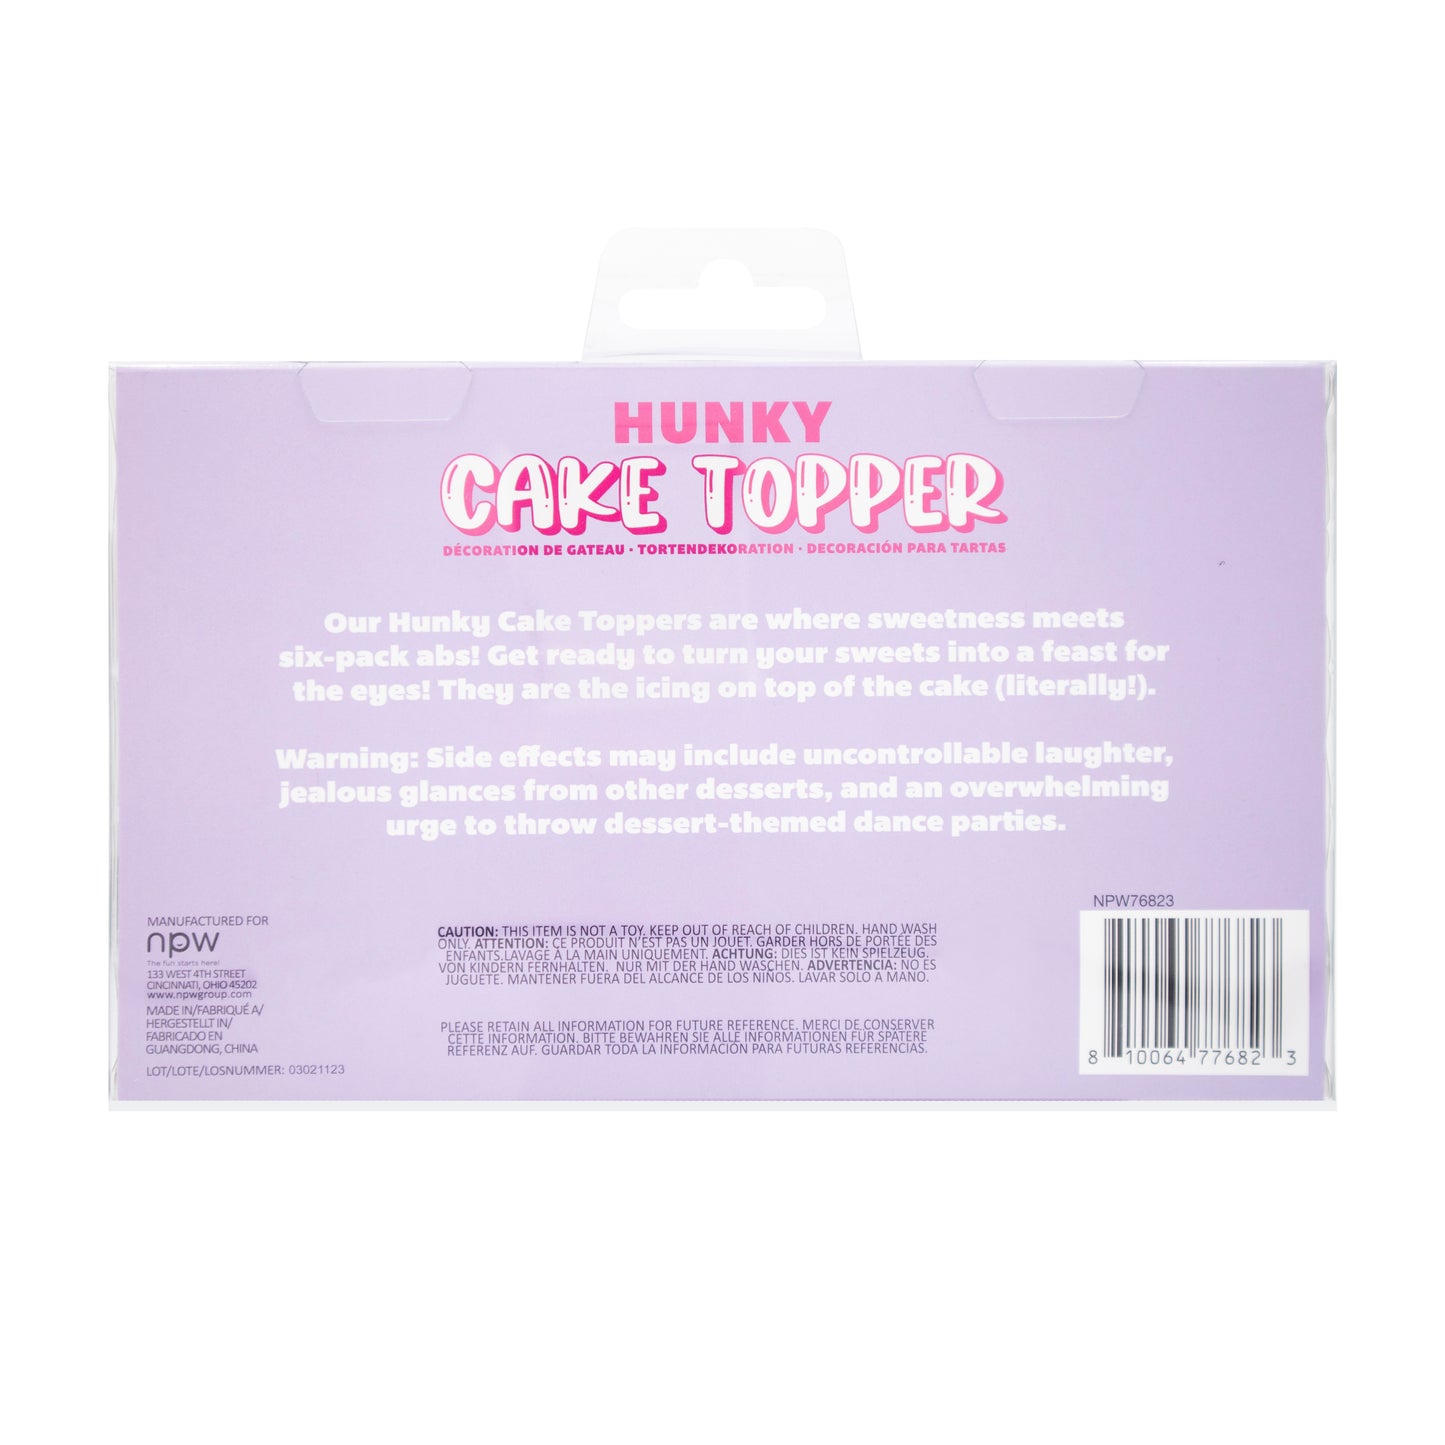 Hunky Cake Toppers-4 Pack